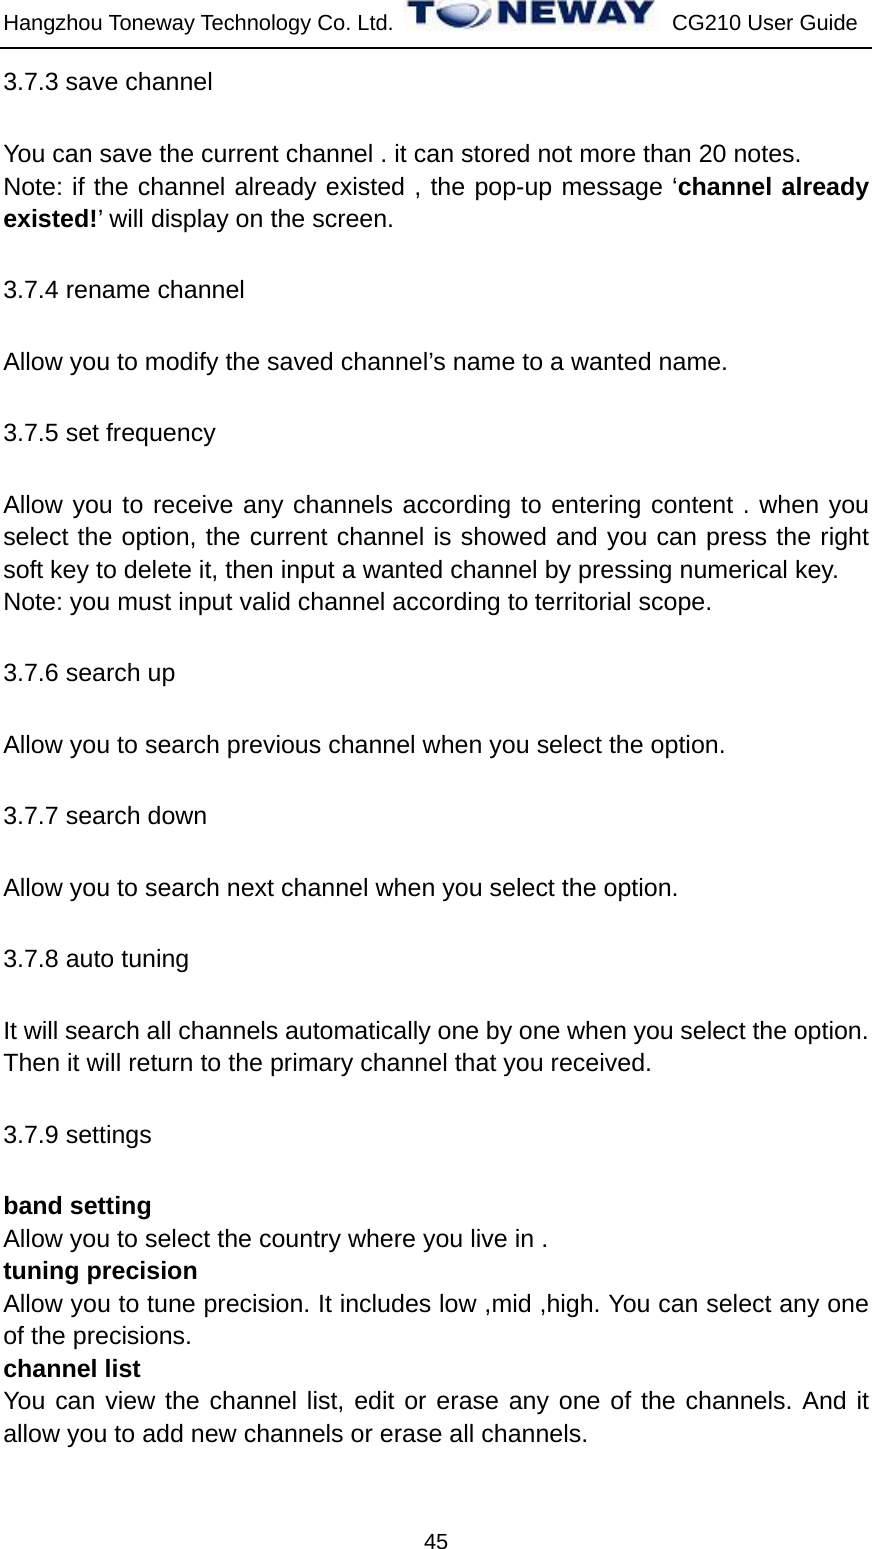 Hangzhou Toneway Technology Co. Ltd.    CG210 User Guide 45 3.7.3 save channel You can save the current channel . it can stored not more than 20 notes. Note: if the channel already existed , the pop-up message ‘channel already existed!’ will display on the screen. 3.7.4 rename channel Allow you to modify the saved channel’s name to a wanted name. 3.7.5 set frequency Allow you to receive any channels according to entering content . when you select the option, the current channel is showed and you can press the right soft key to delete it, then input a wanted channel by pressing numerical key. Note: you must input valid channel according to territorial scope. 3.7.6 search up Allow you to search previous channel when you select the option. 3.7.7 search down Allow you to search next channel when you select the option. 3.7.8 auto tuning It will search all channels automatically one by one when you select the option. Then it will return to the primary channel that you received. 3.7.9 settings band setting Allow you to select the country where you live in . tuning precision Allow you to tune precision. It includes low ,mid ,high. You can select any one of the precisions. channel list You can view the channel list, edit or erase any one of the channels. And it allow you to add new channels or erase all channels.  